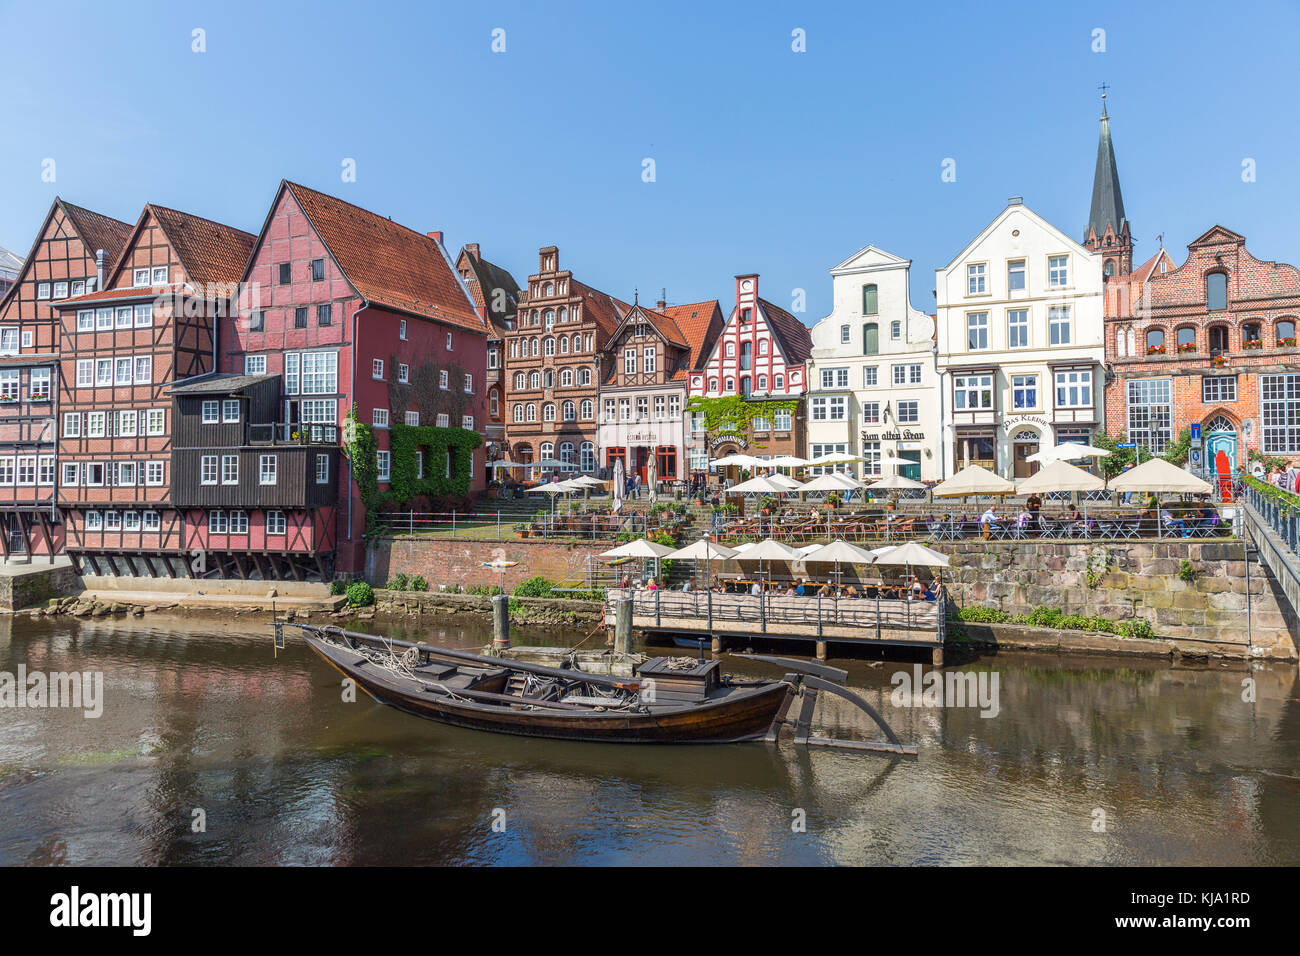 LUNEBURG, GERMANY - MAY 28, 2016: Historic waterfront in Luneburg Stock Photo